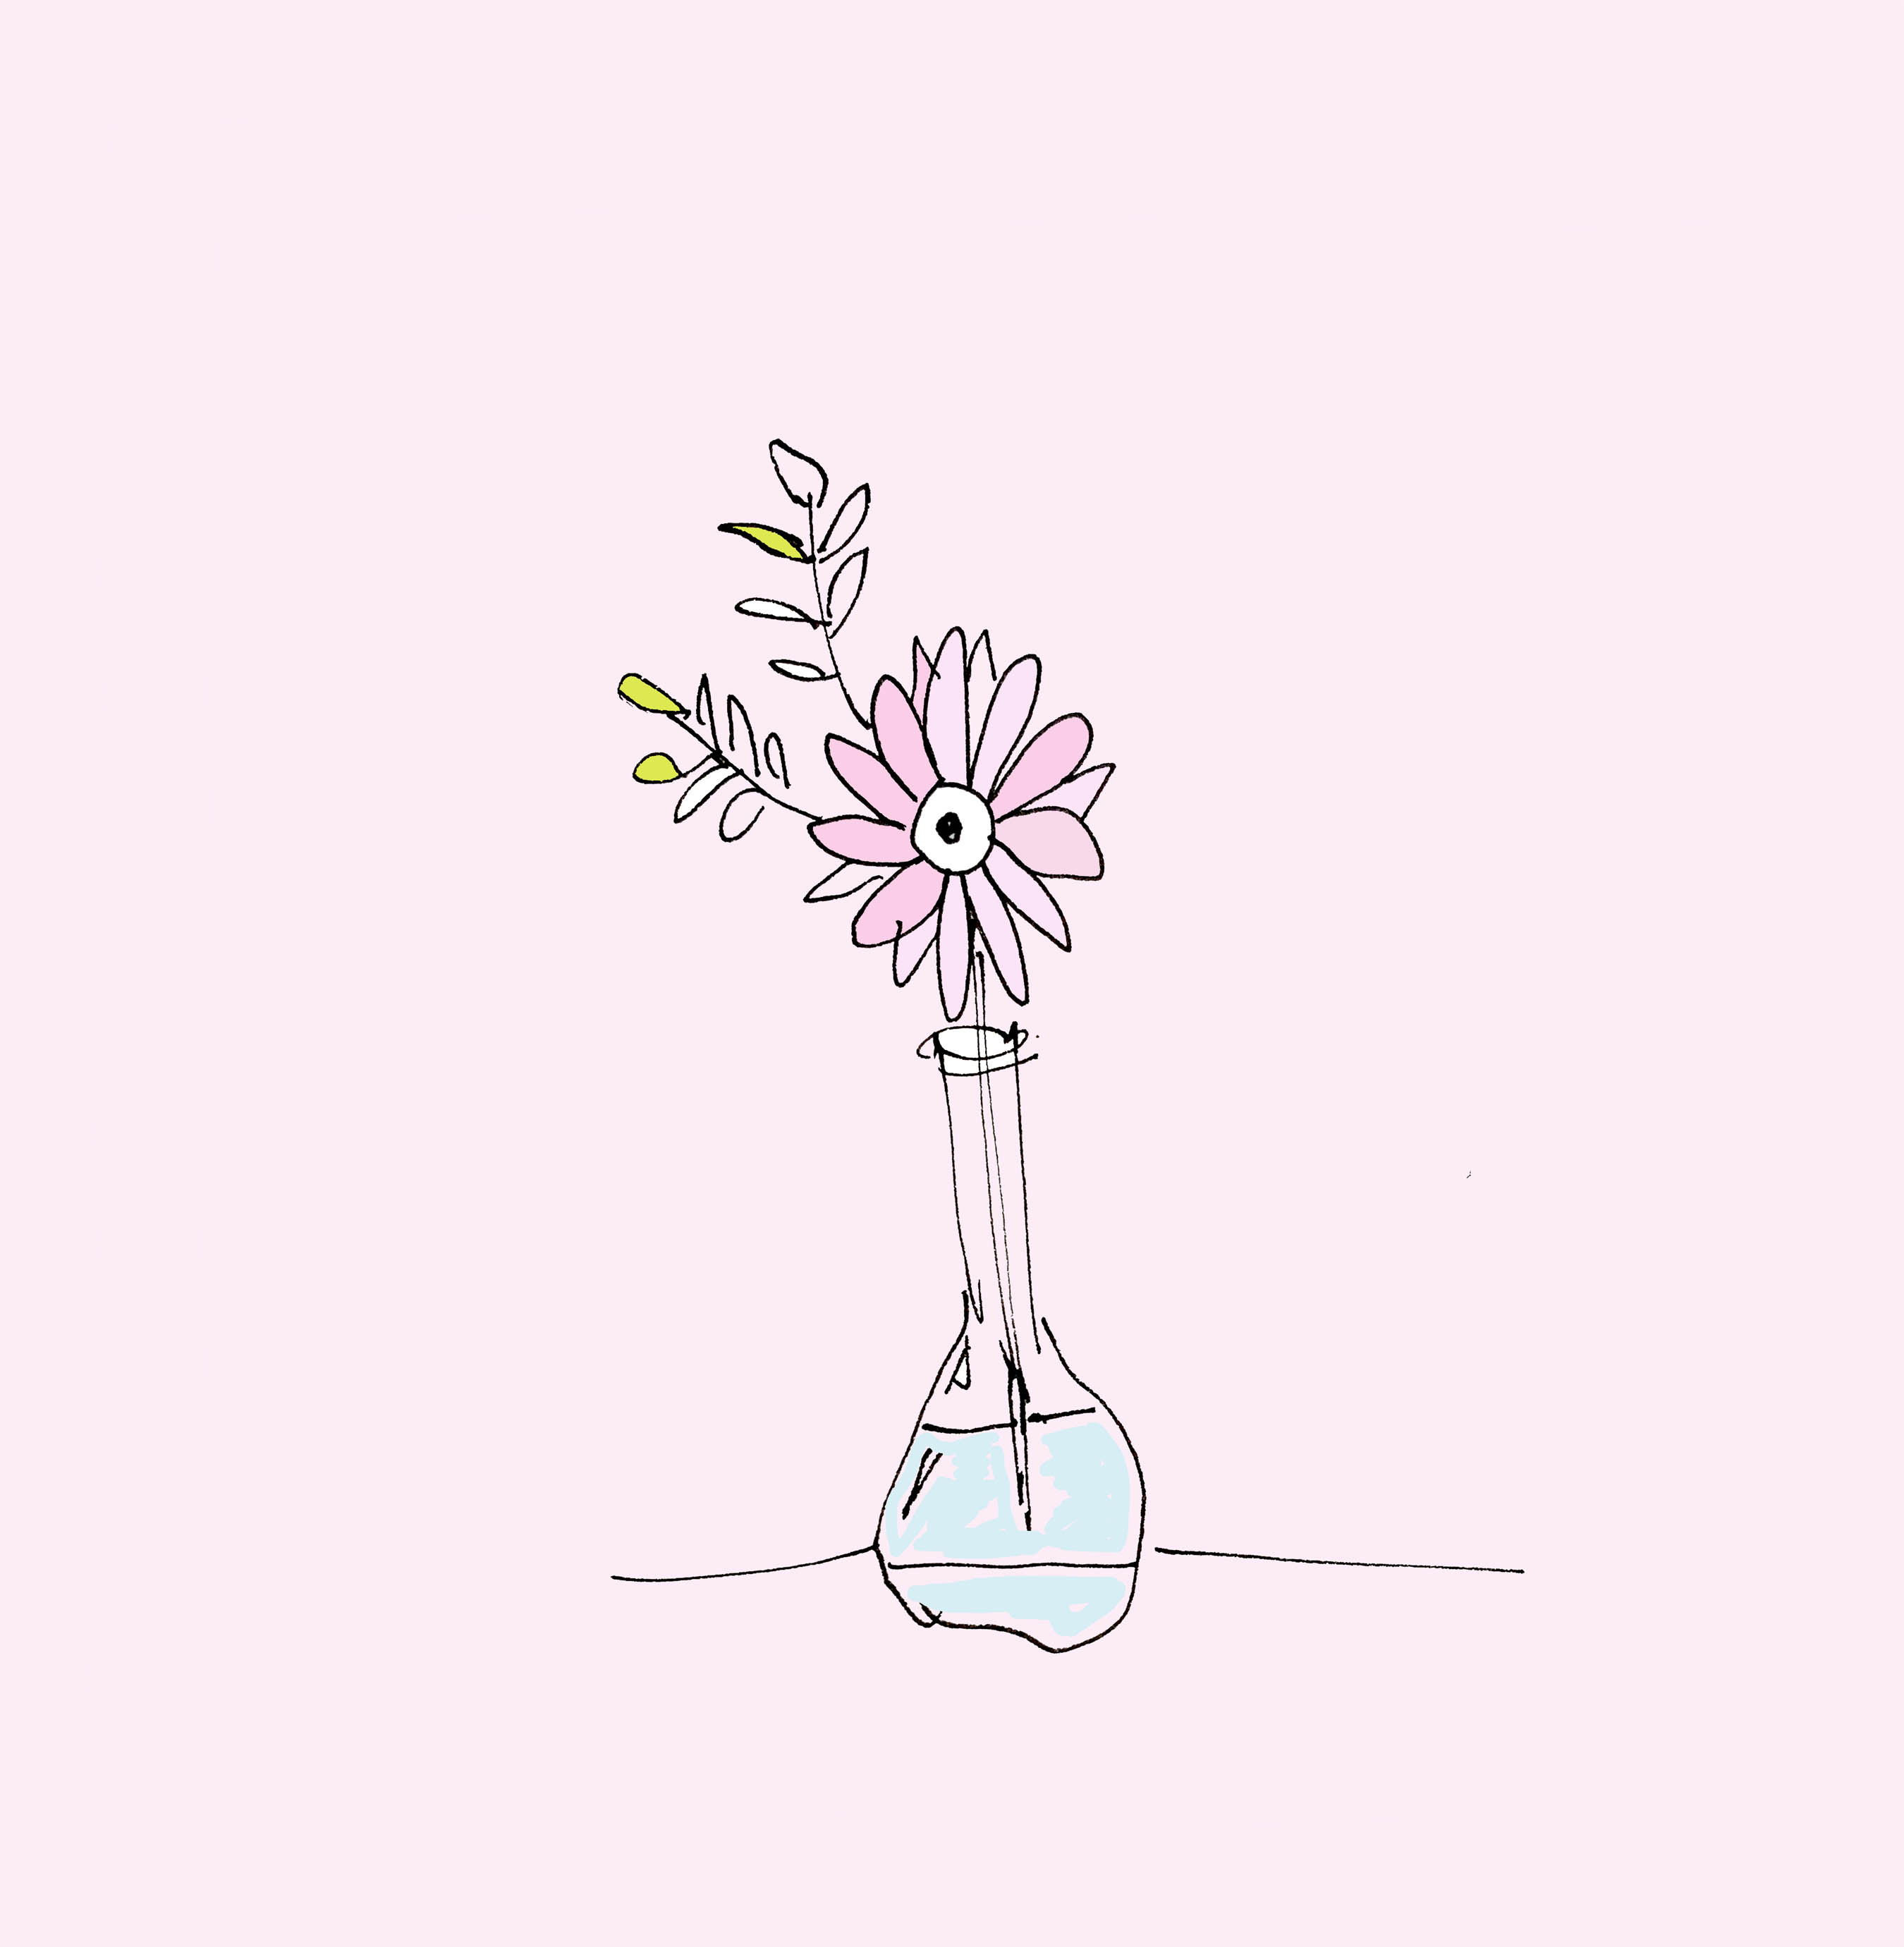 art every day number 620 the lonely flower illustration drawing